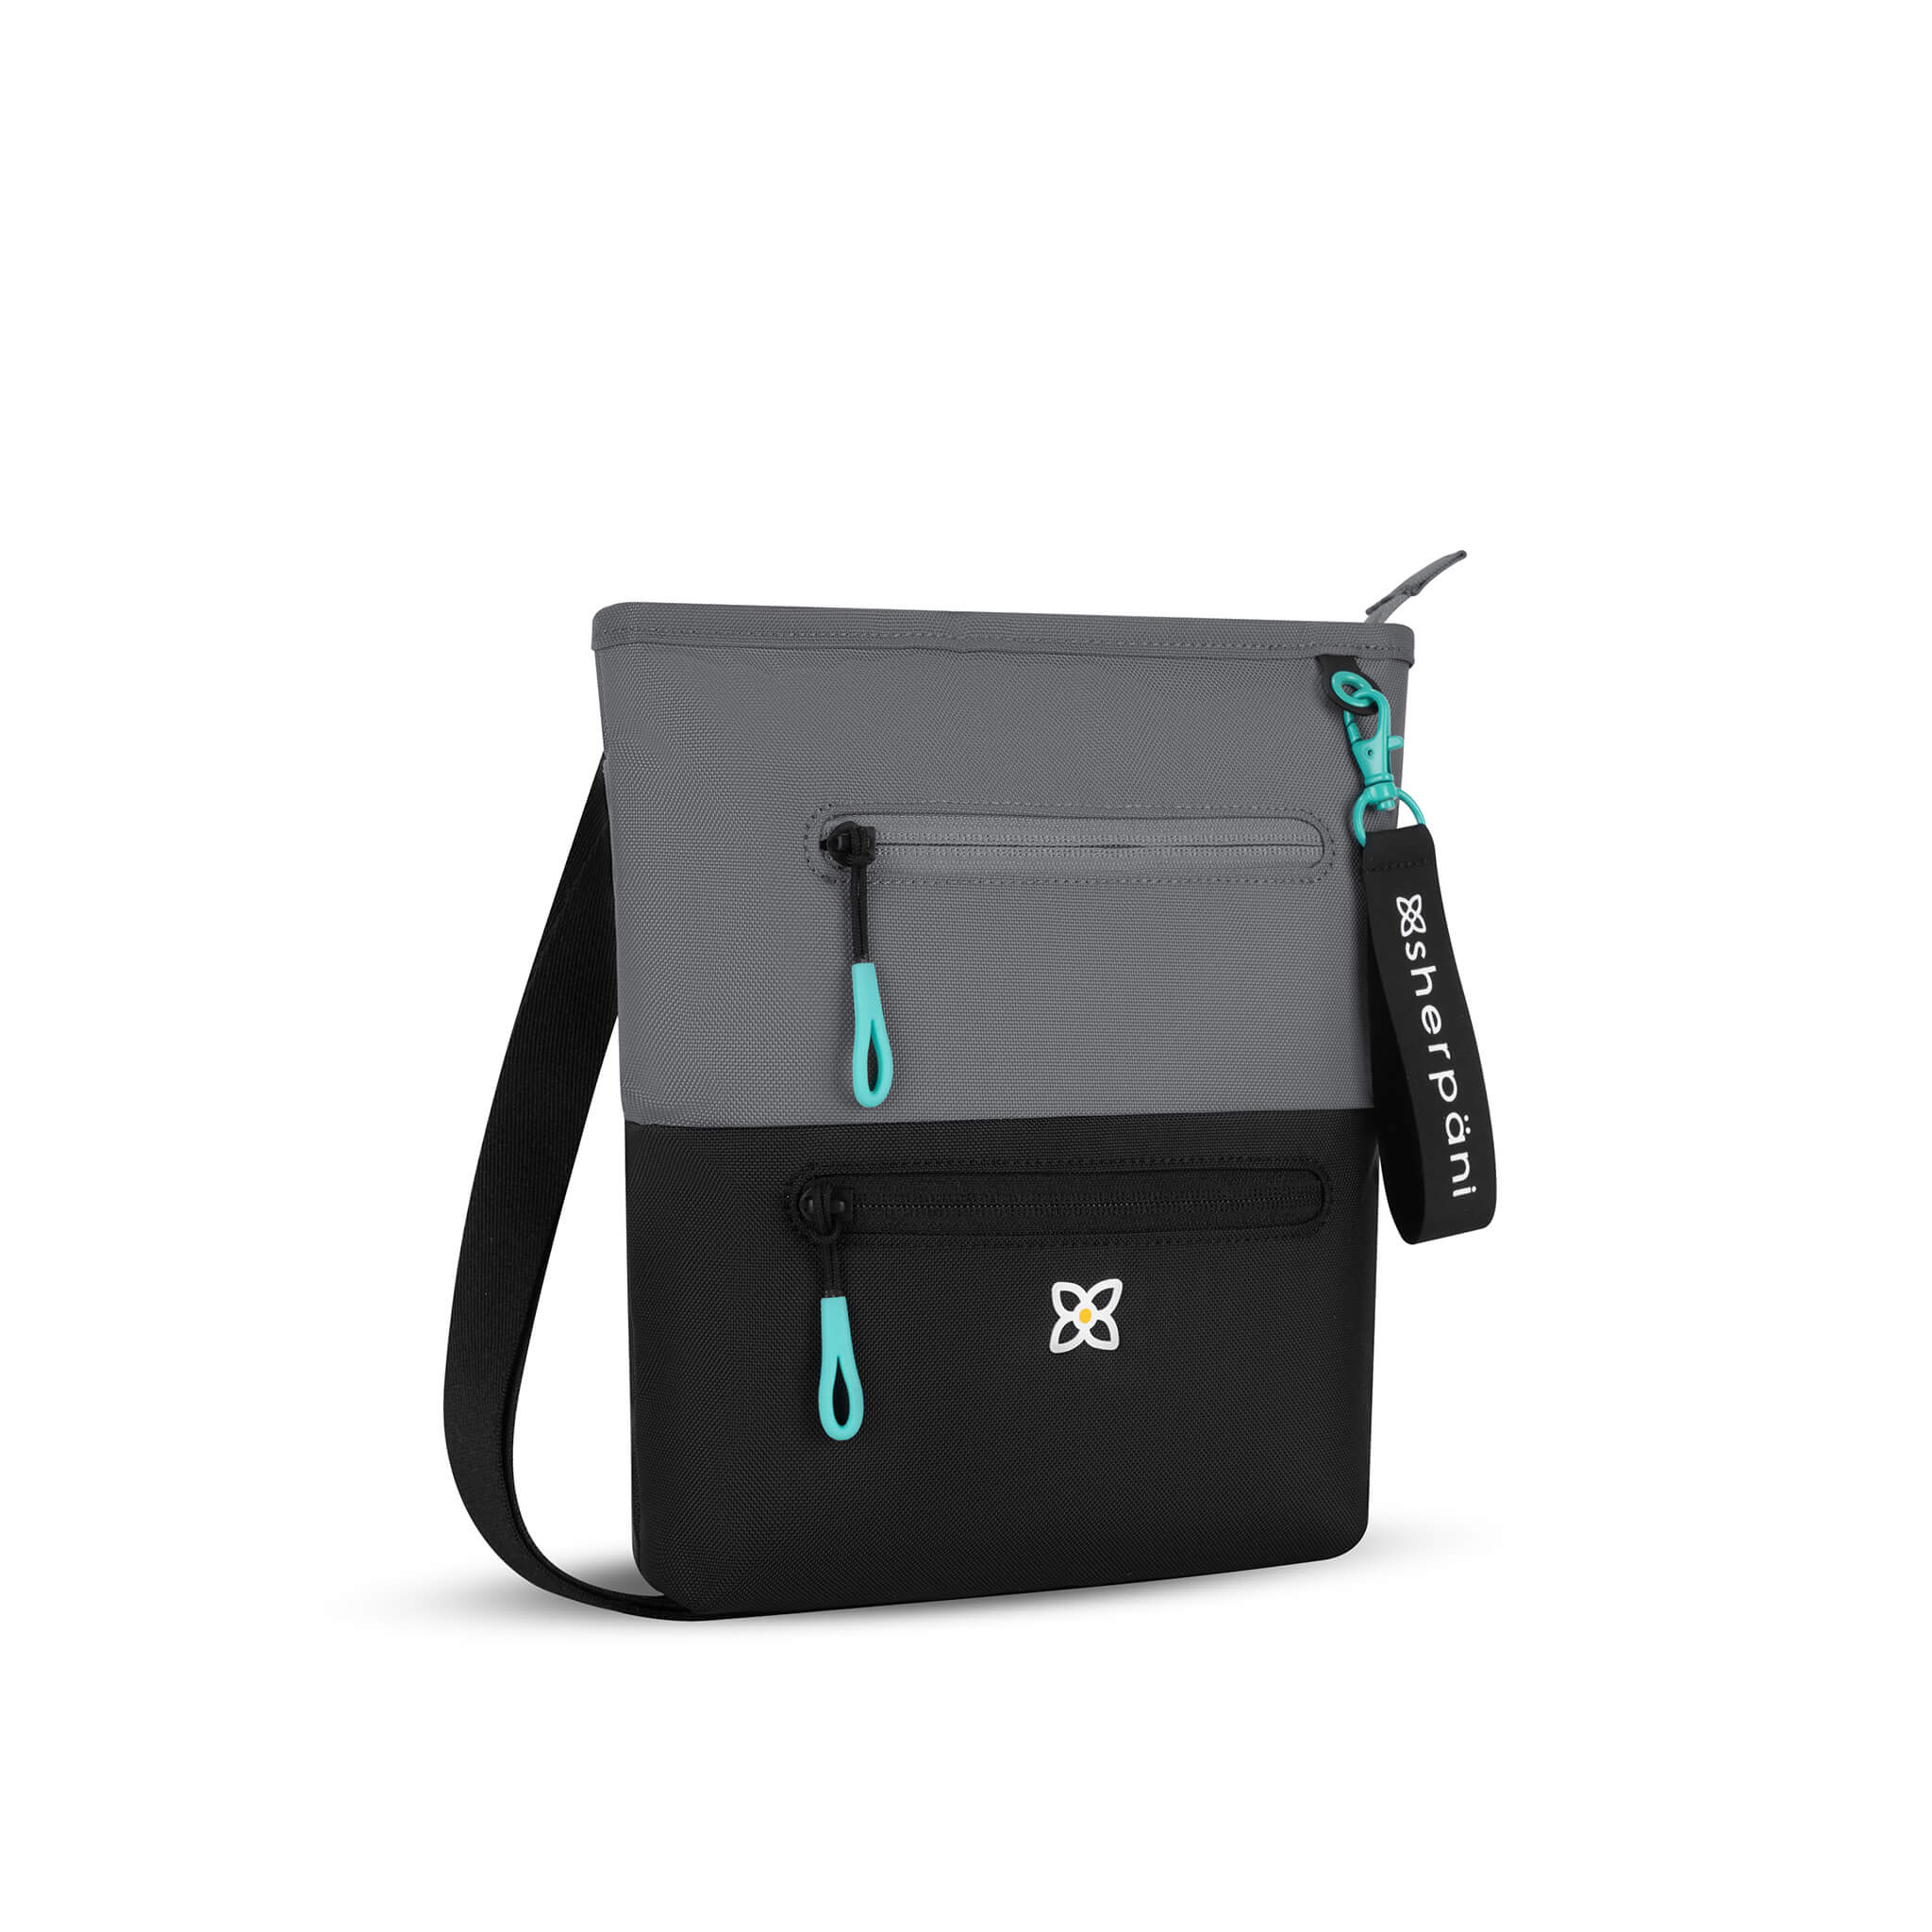 Angled front view of Sherpani crossbody travel bag, the Sadie in Moonstone. Sadie features include two front zipper pockets, a discrete side pocket, detachable keychain, adjustable crossbody strap, back slip pocket and RFID blocking technology. The Moonstone color is two-toned in gray and black with turquoise accents.